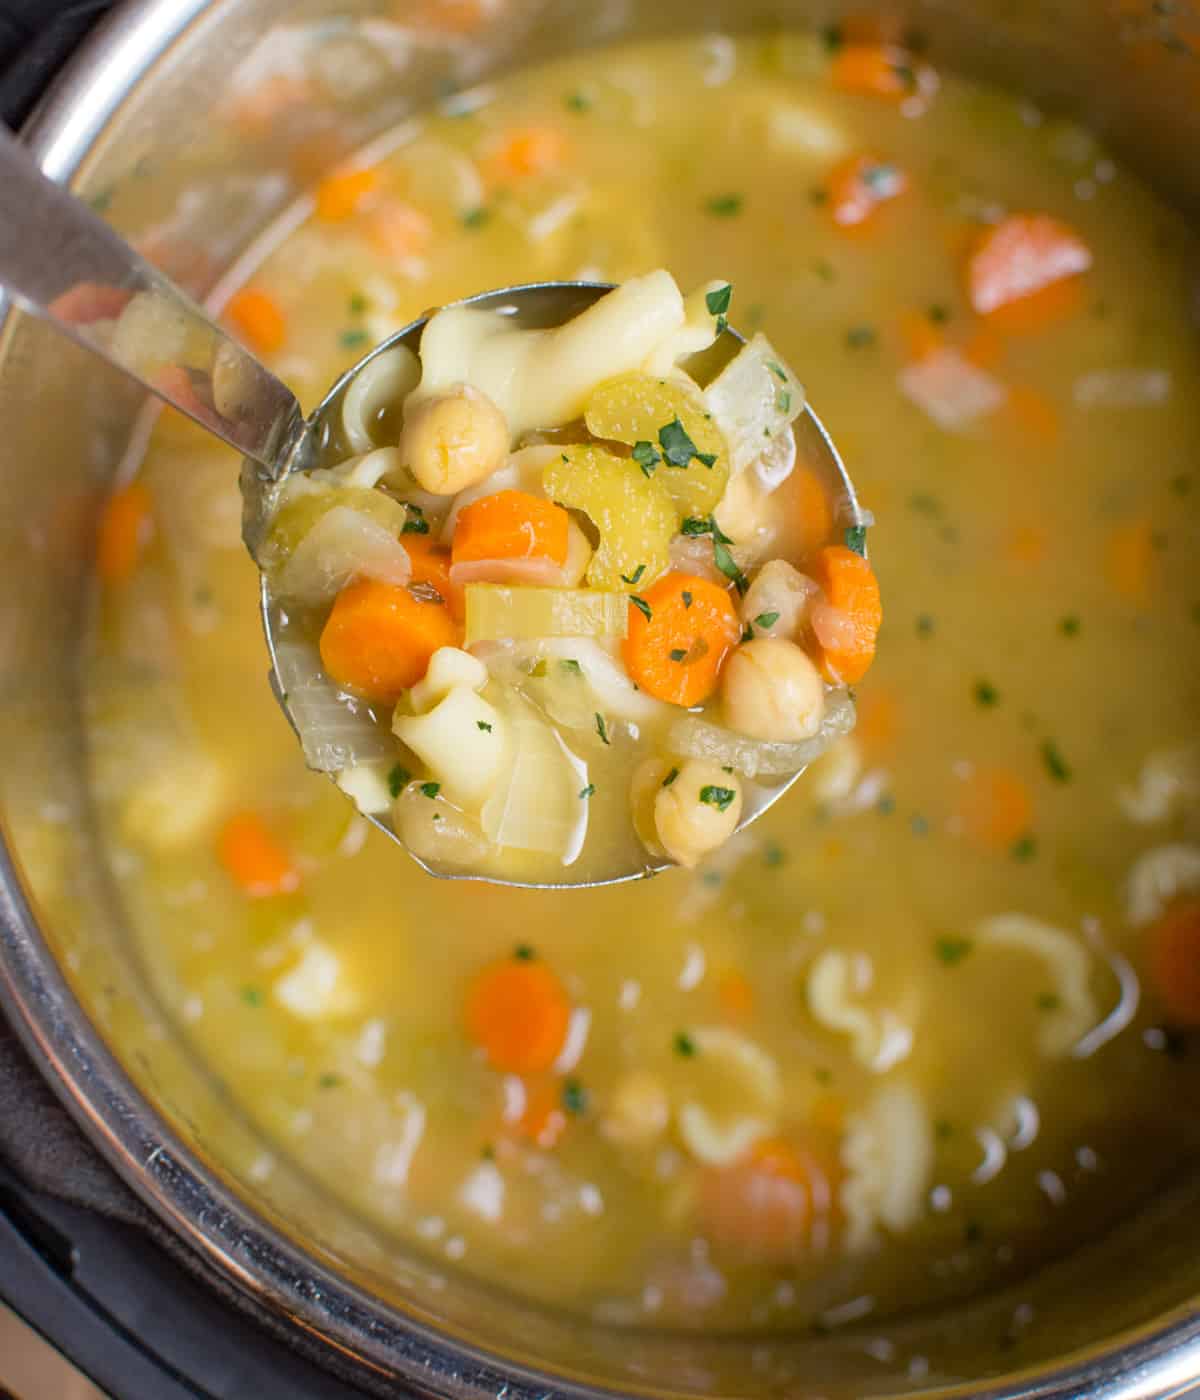 A ladle of soup filled with chickpeas, pasta, carrots, onions, and celery held over an Instant Pot full of soup.